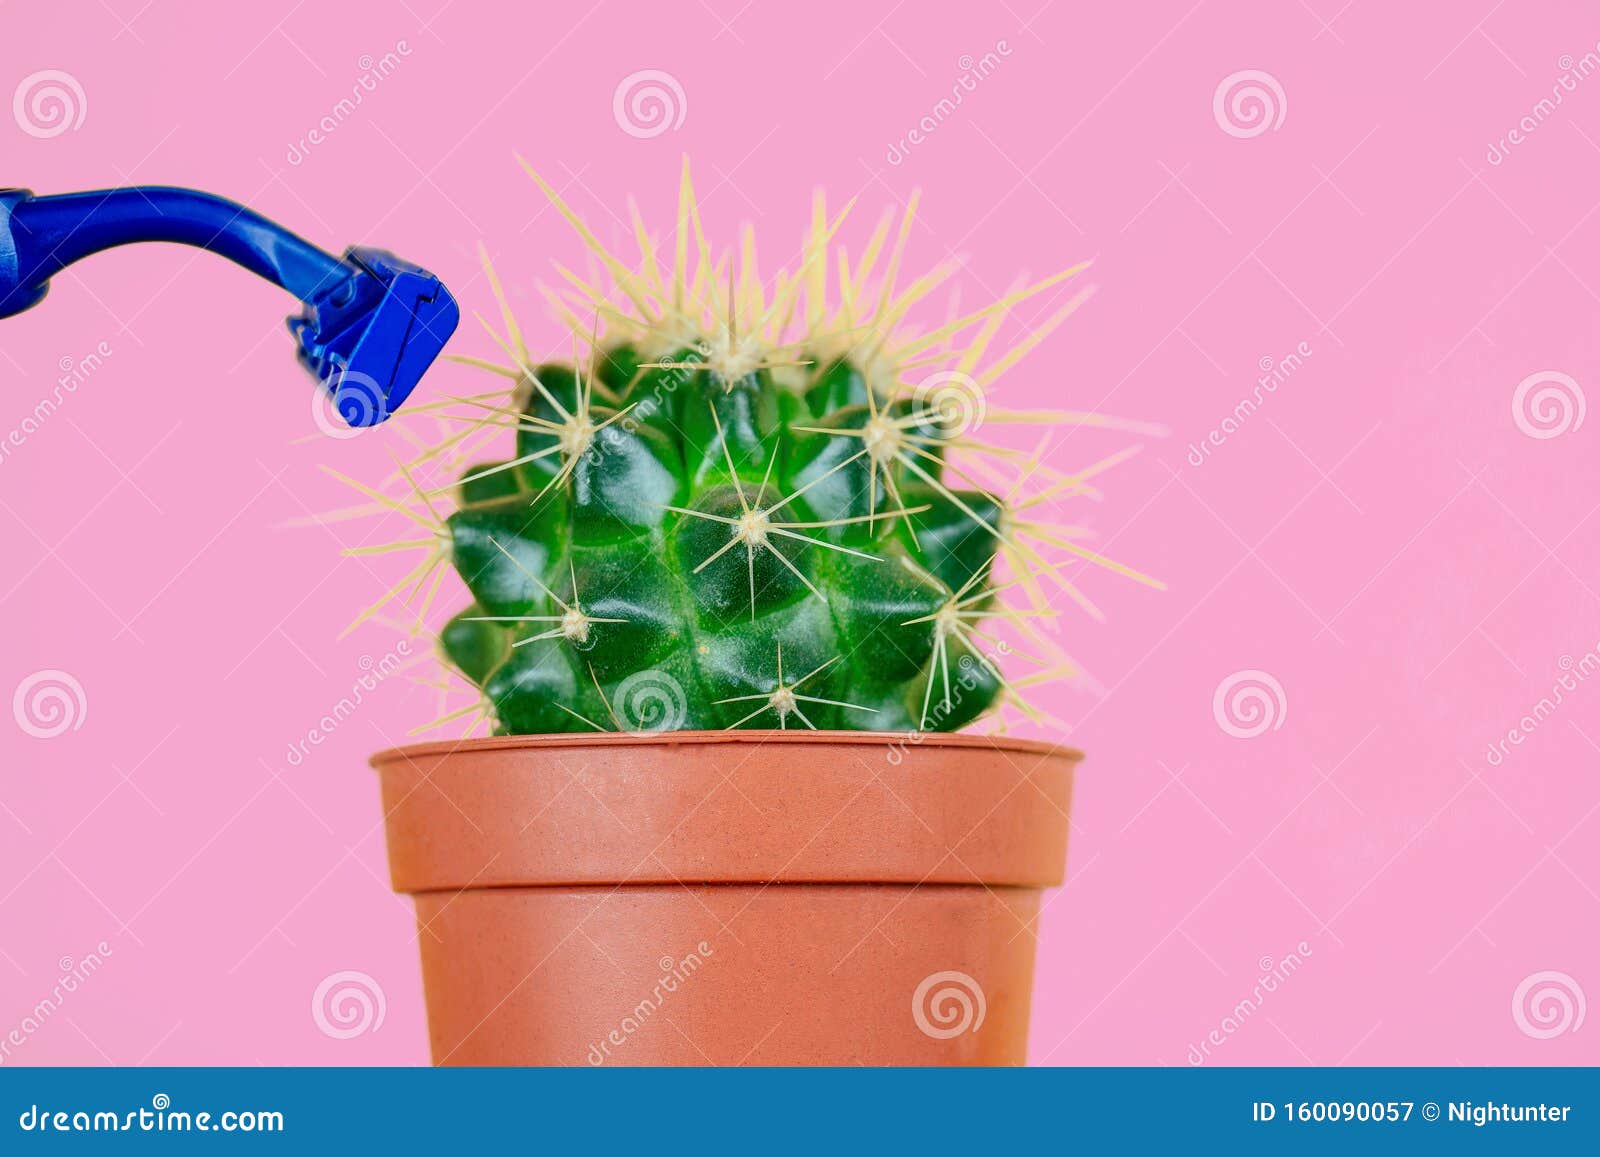 https://thumbs.dreamstime.com/z/green-cactus-brown-pot-razor-pink-background-concept-depilation-epilation-removal-unwanted-hair-body-160090057.jpg